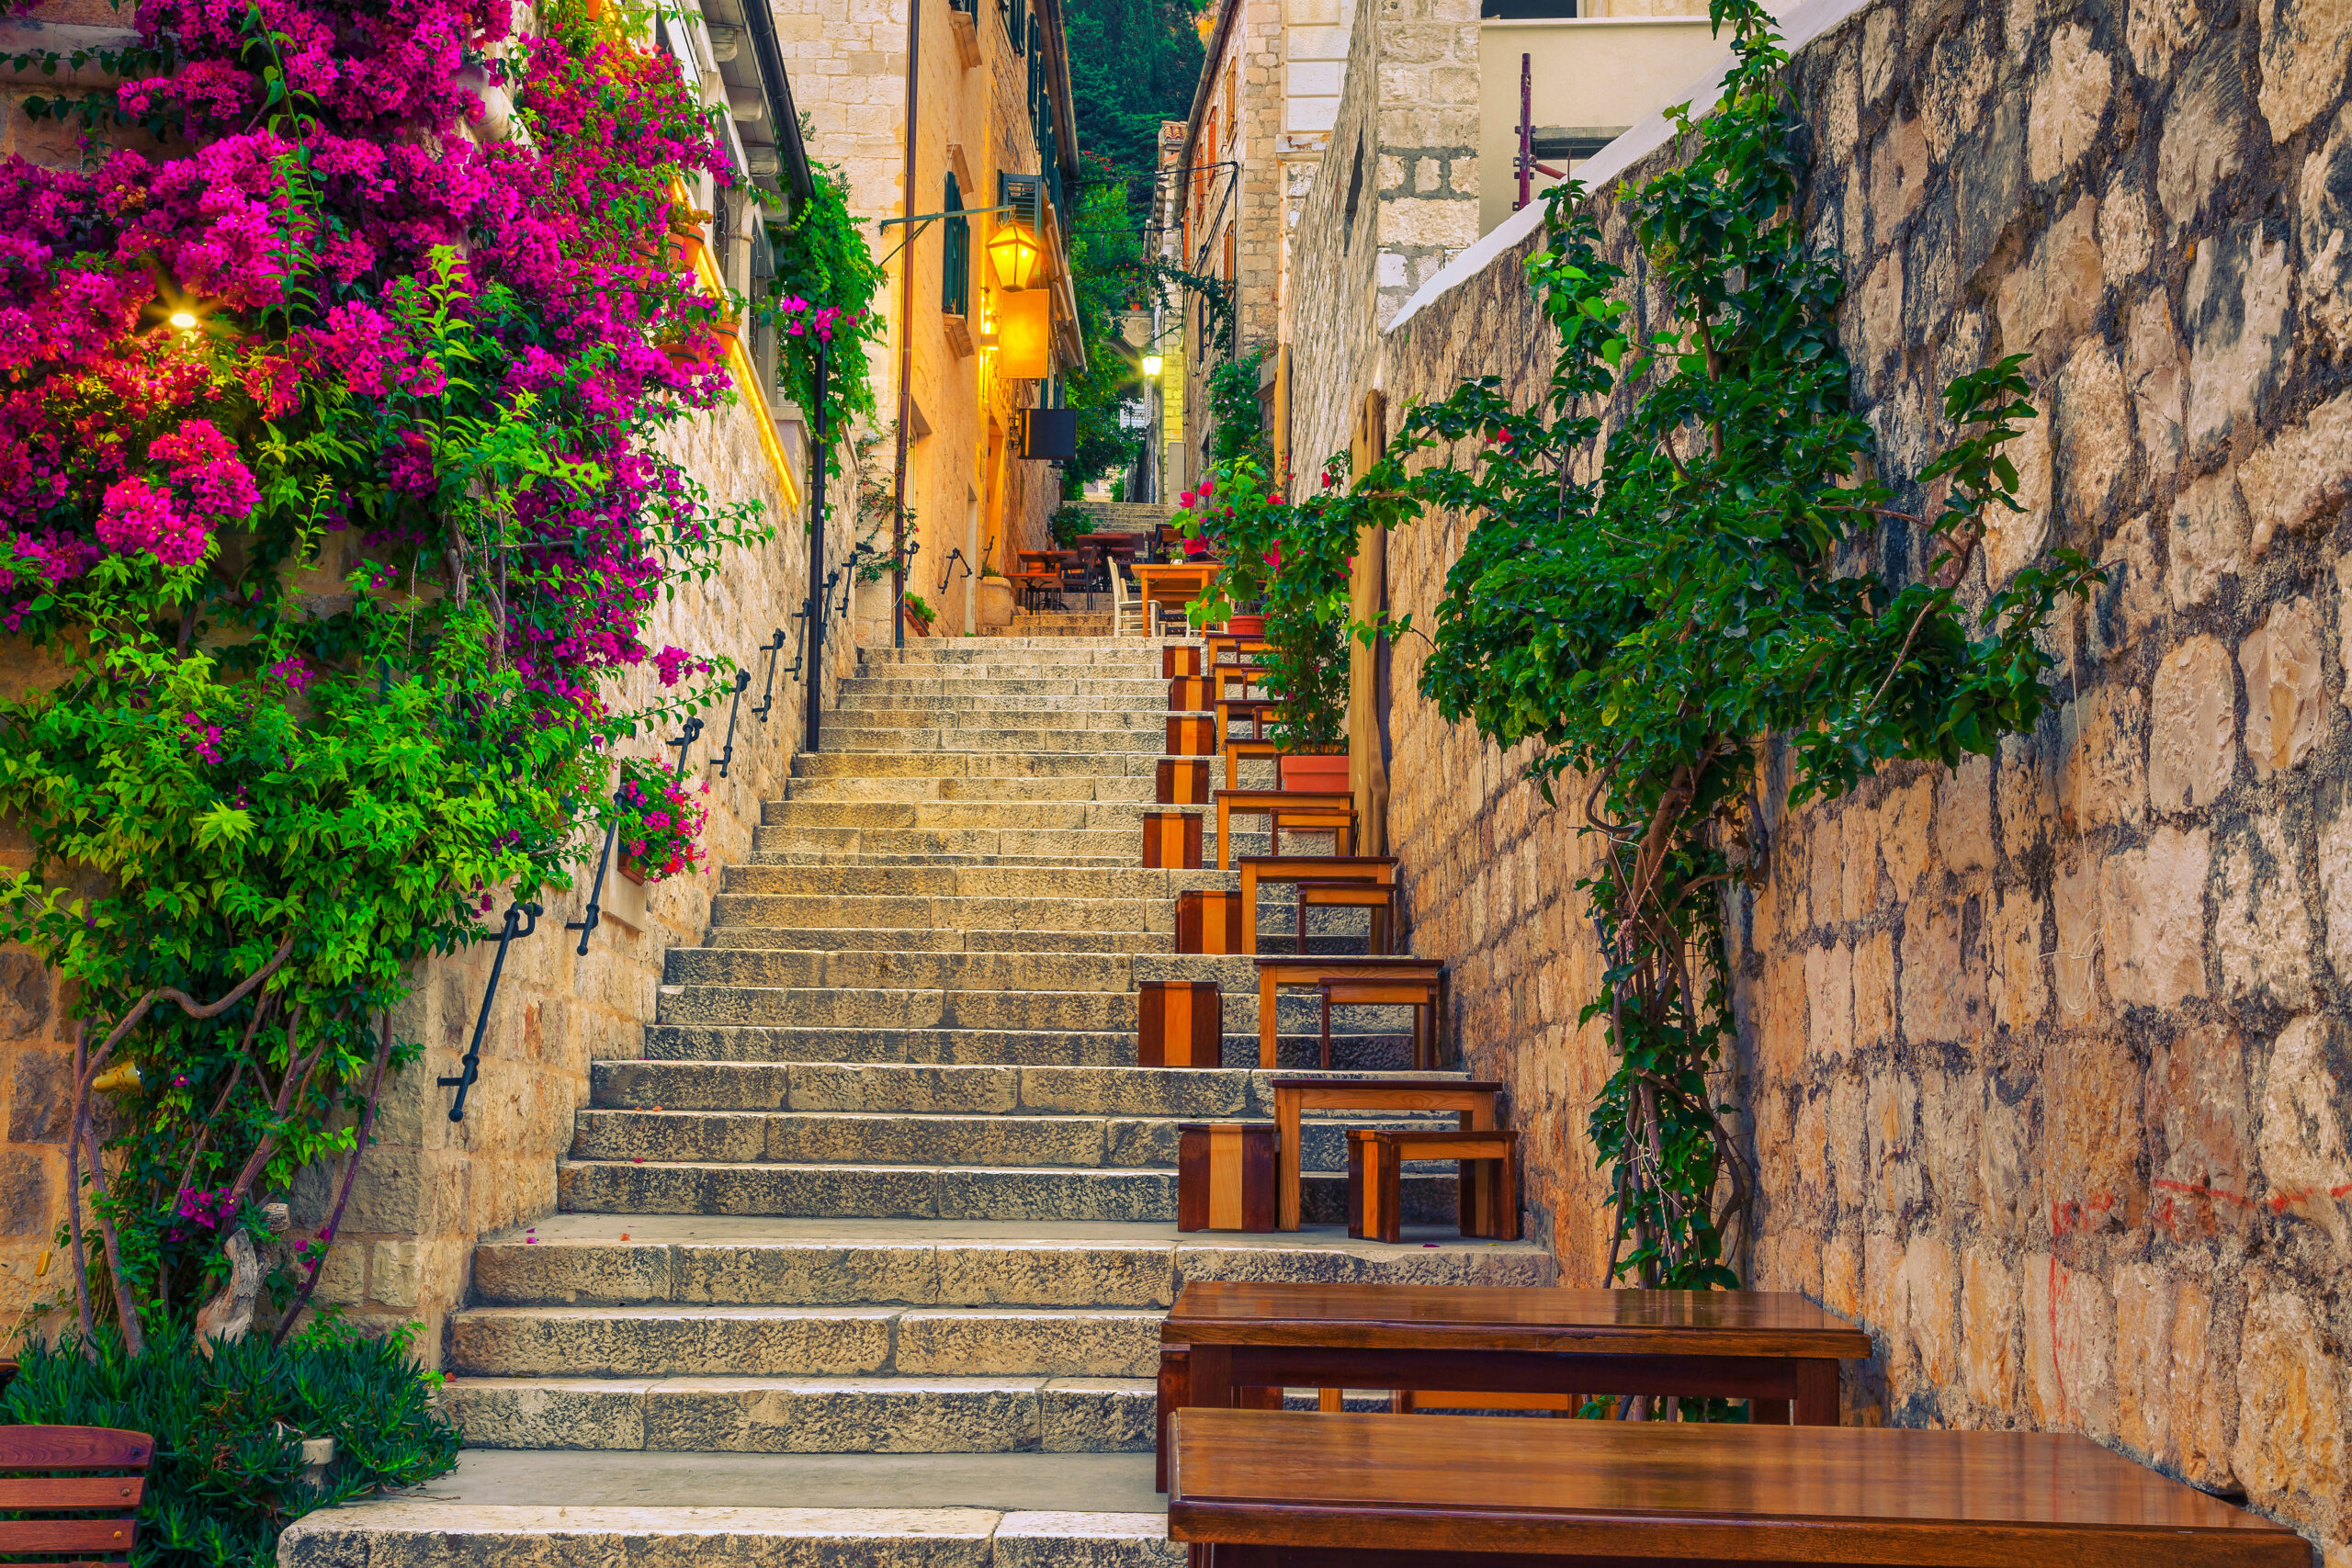 Cozy narrow street with street cafe and restaurant at morning. Rustic street with stone houses and colorful bougainvillea mediterranean flowers.